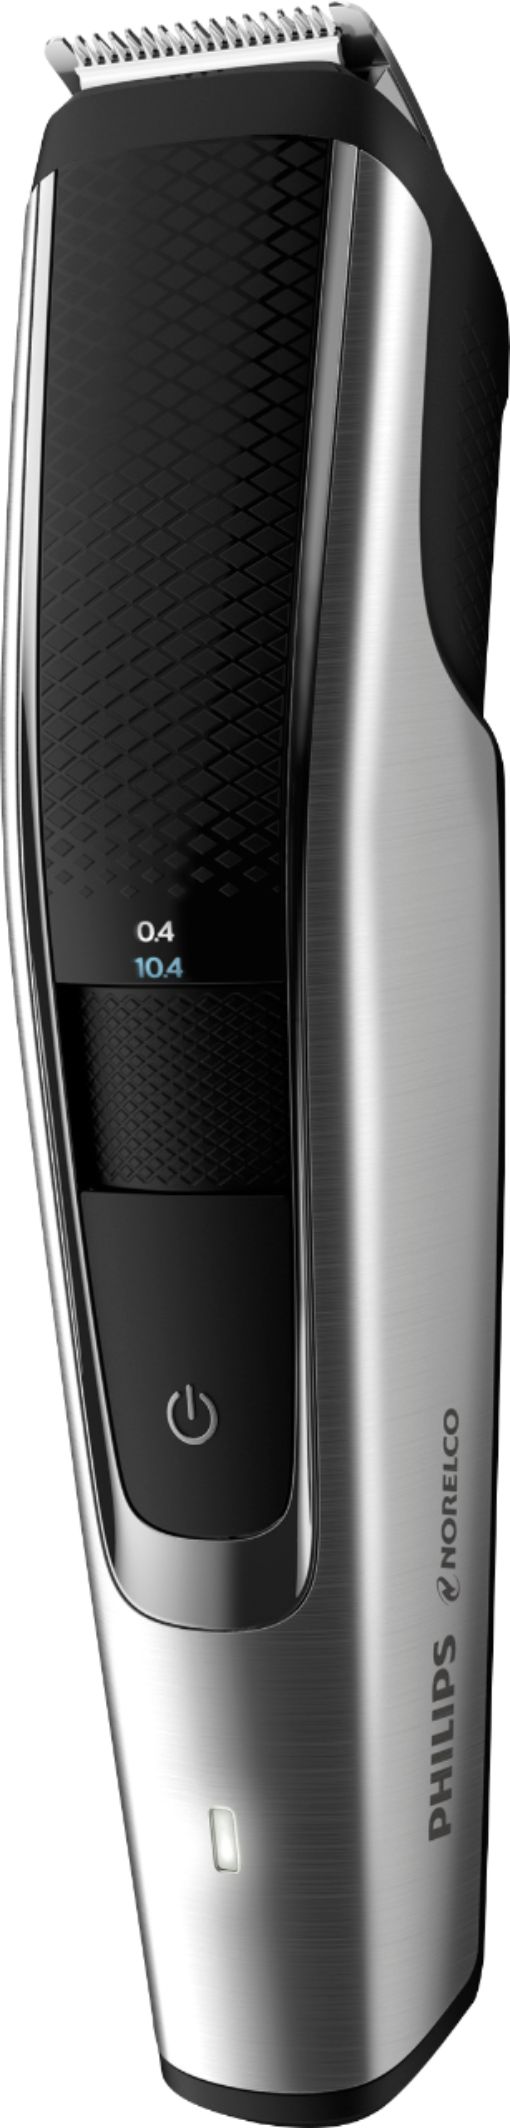 Left View: Philips Norelco - 5000 Series Hair Trimmer - Black/Silver